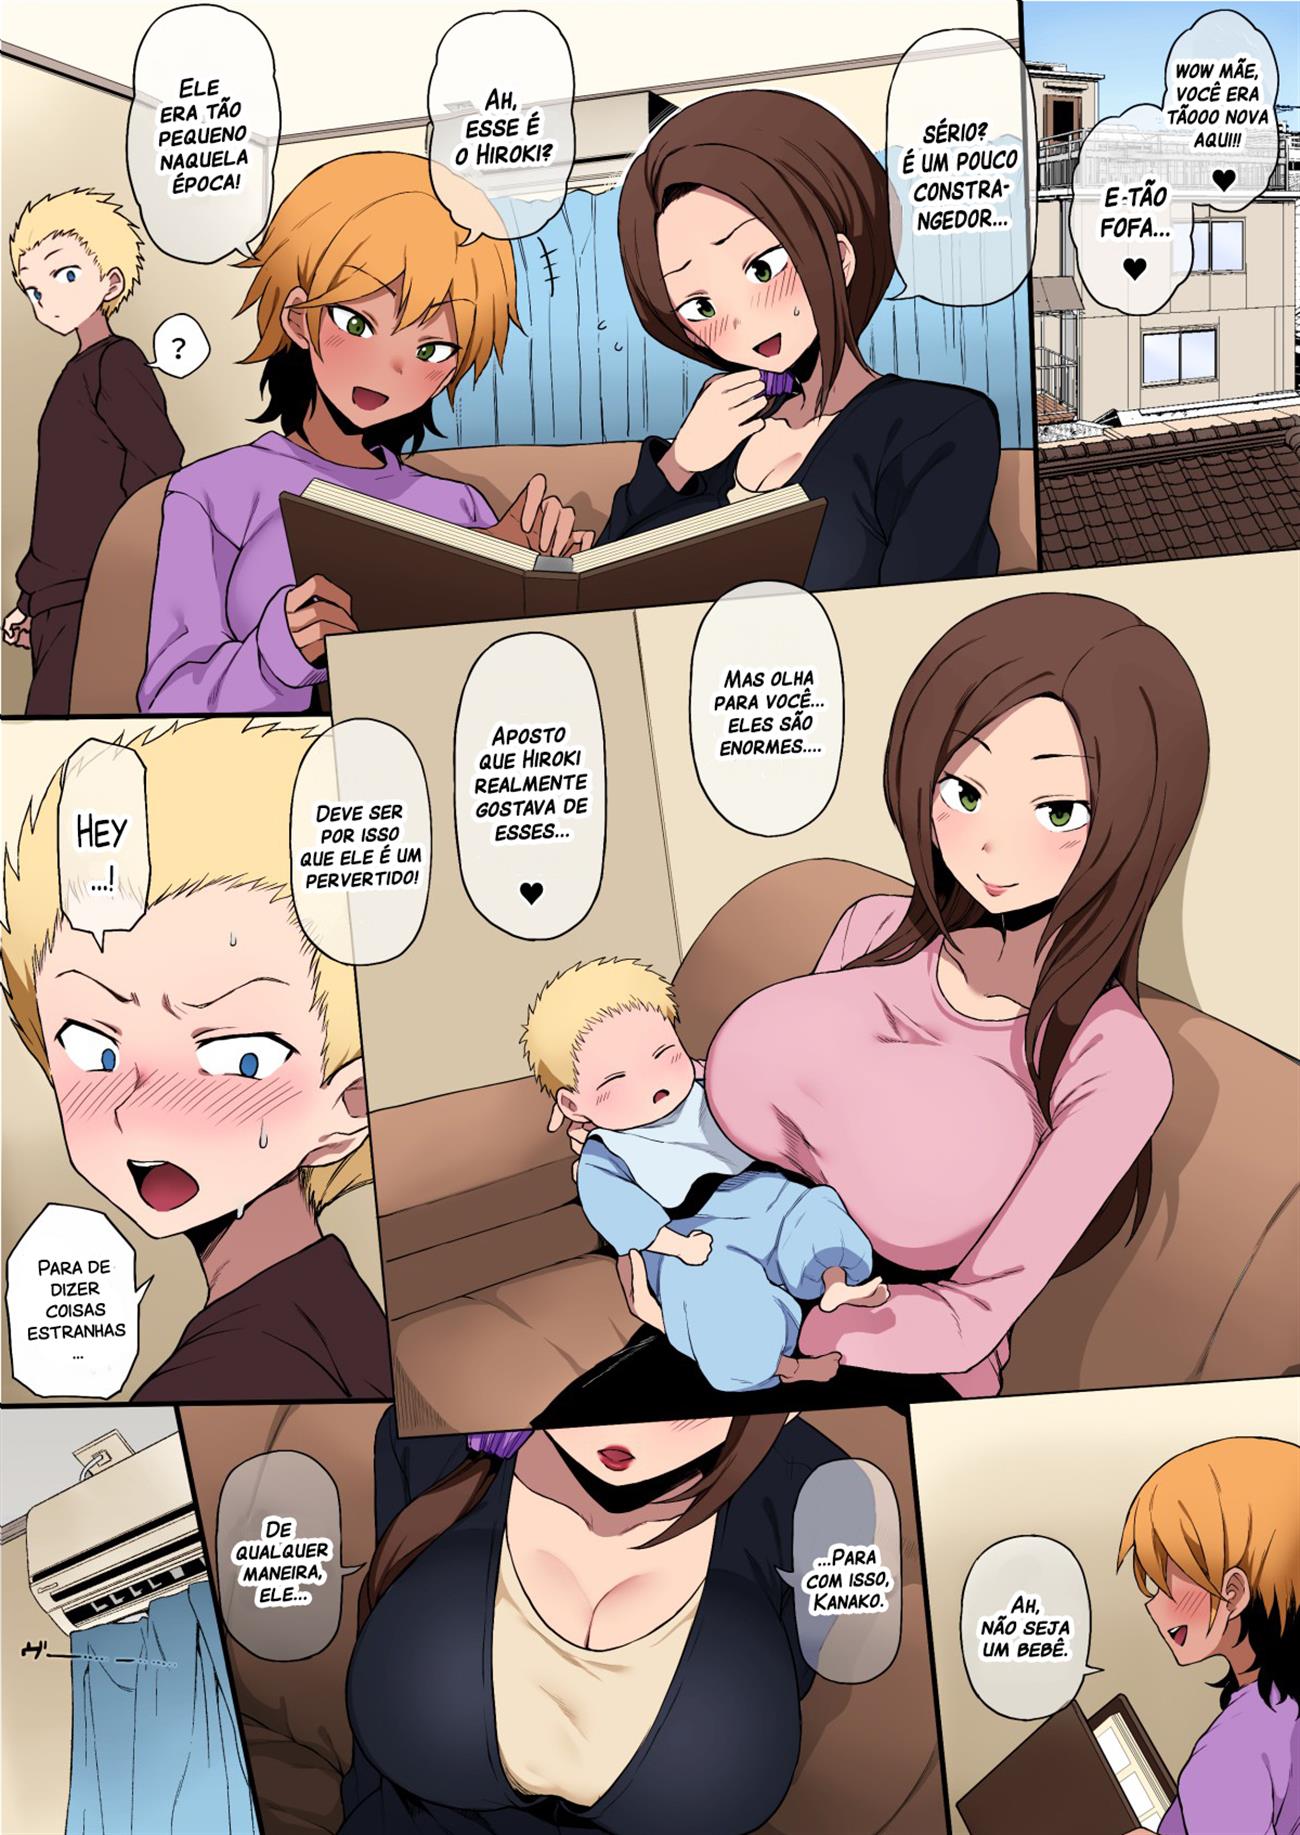 Stolen Mother's Breasts (Colorido)